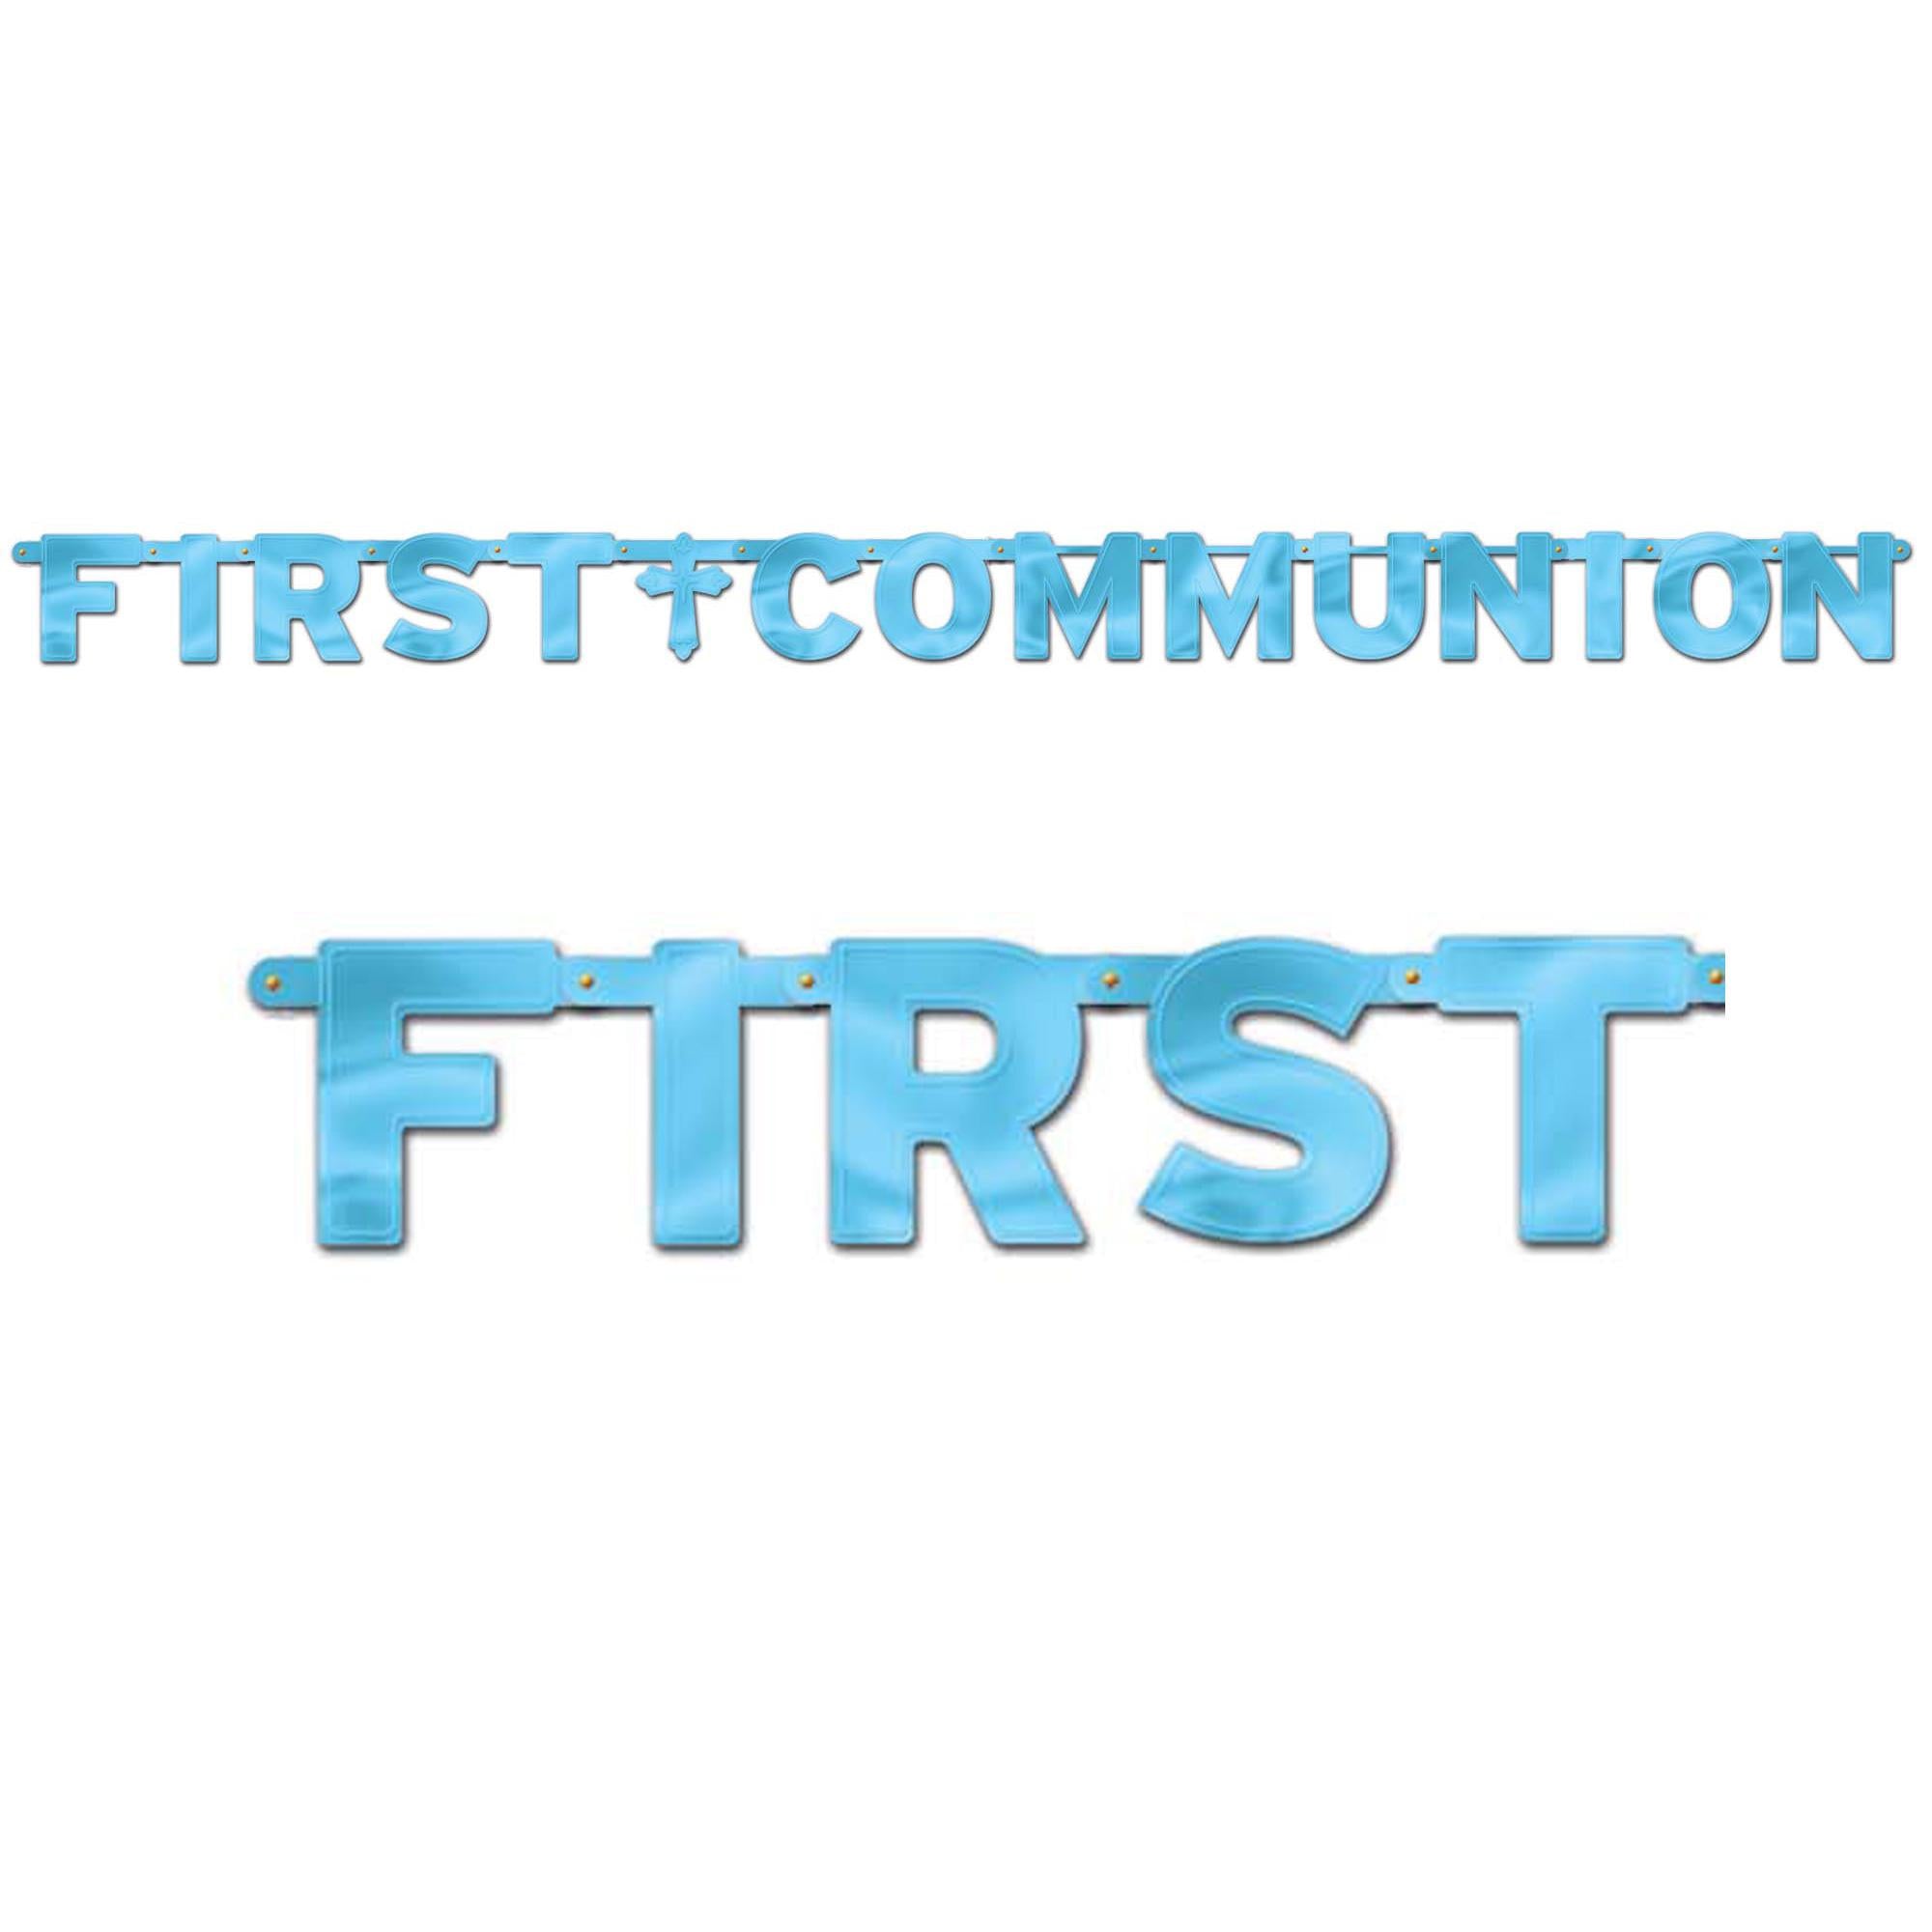 First Communion Blue Letter Banner 8 3/4ft x 12in Decorations - Party Centre